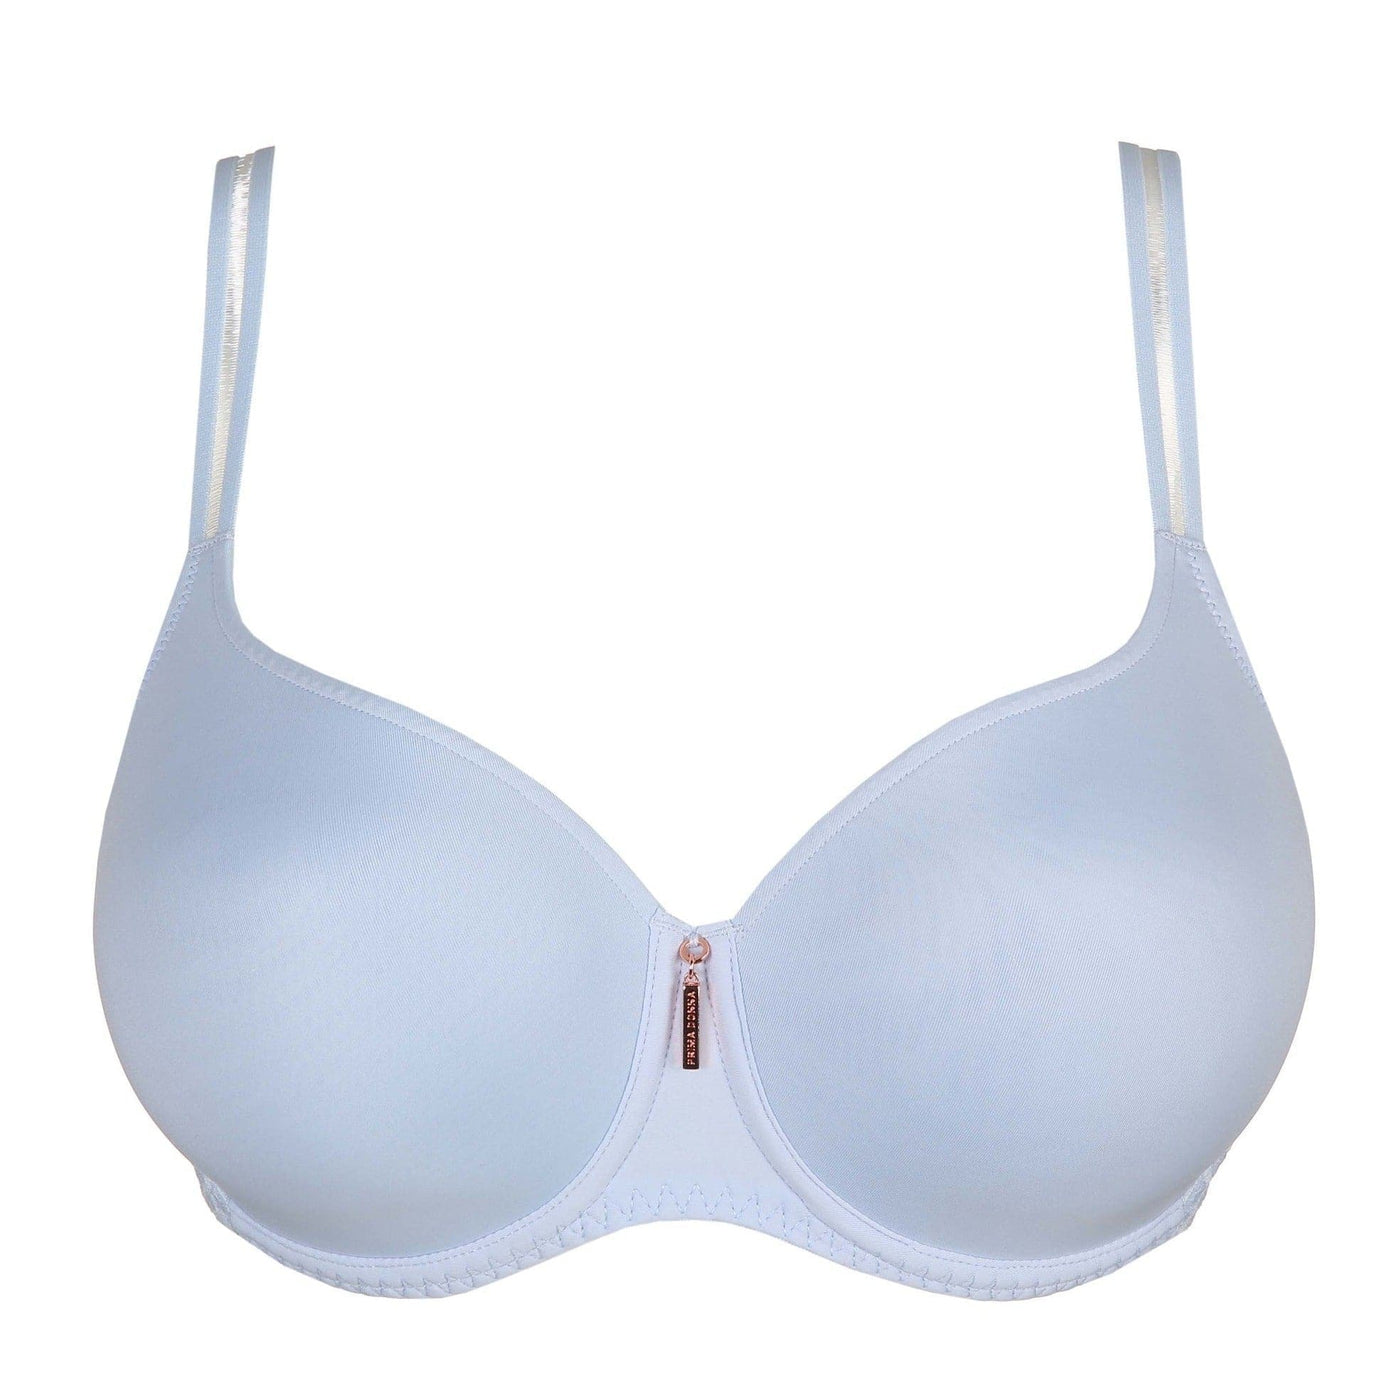 Prima Donna Twist East End Padded Heart Shape Bra in Heather Blue 0241930-Bras-Prima Donna-Heather Blue-32-D-Anna Bella Fine Lingerie, Reveal Your Most Gorgeous Self!